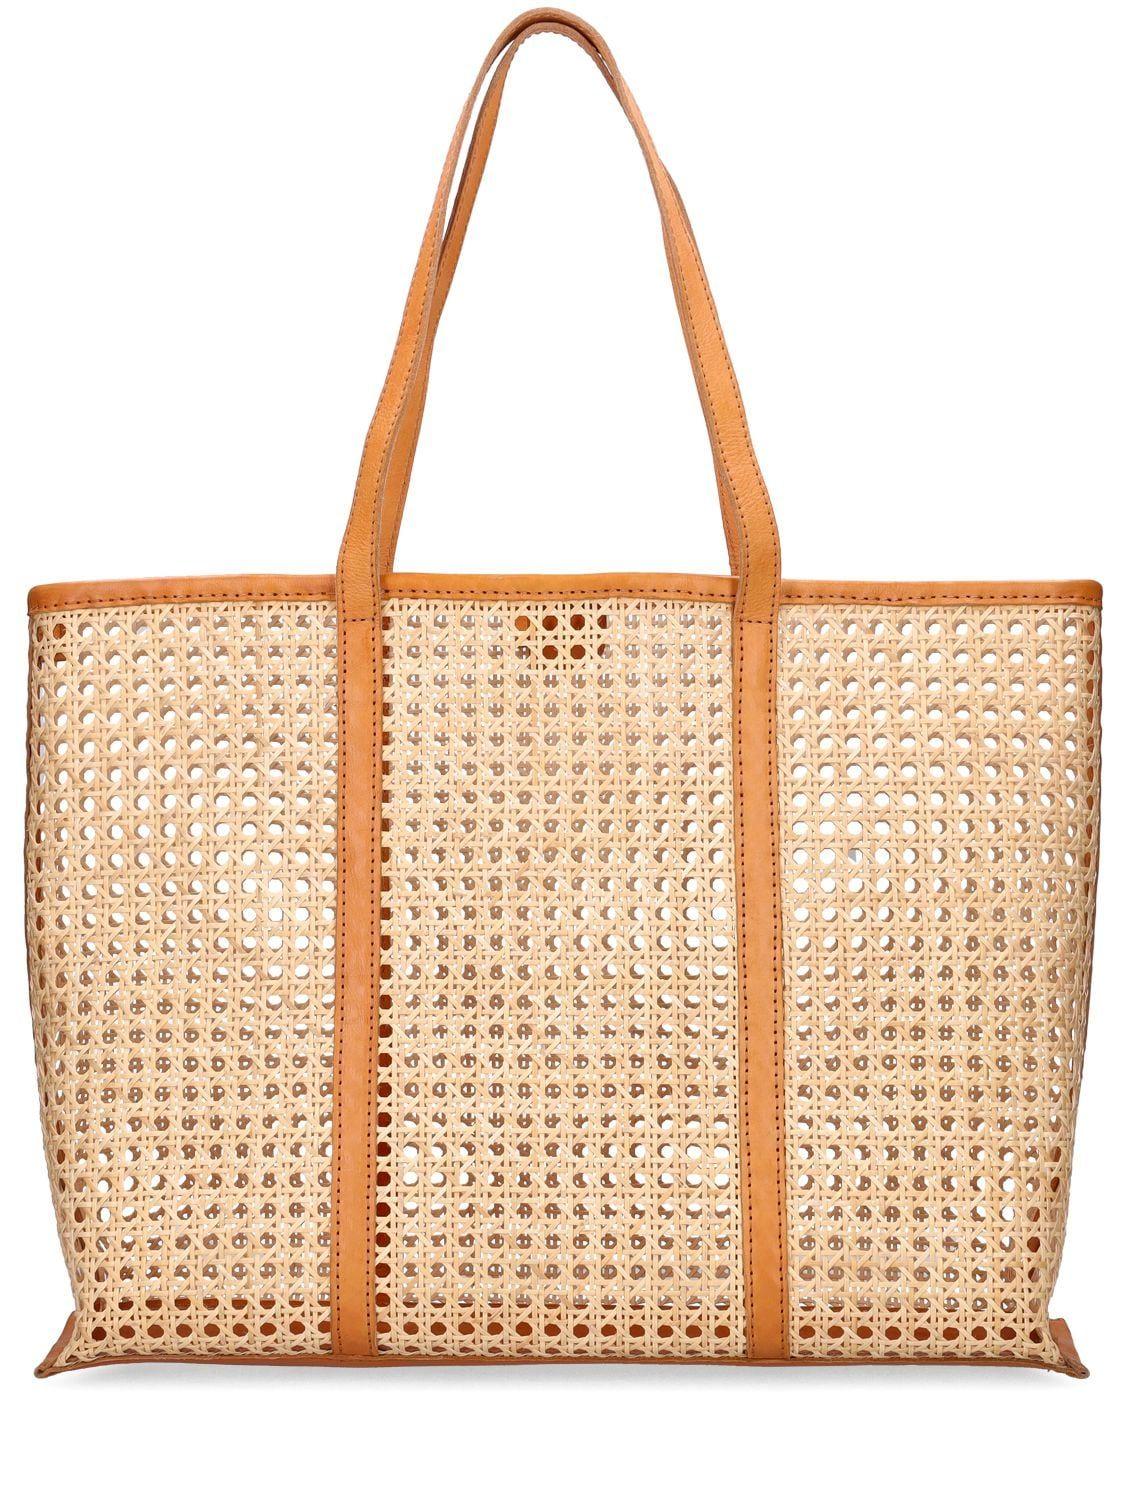 Bembien Large Margot Rattan & Leather Tote Bag in Natural